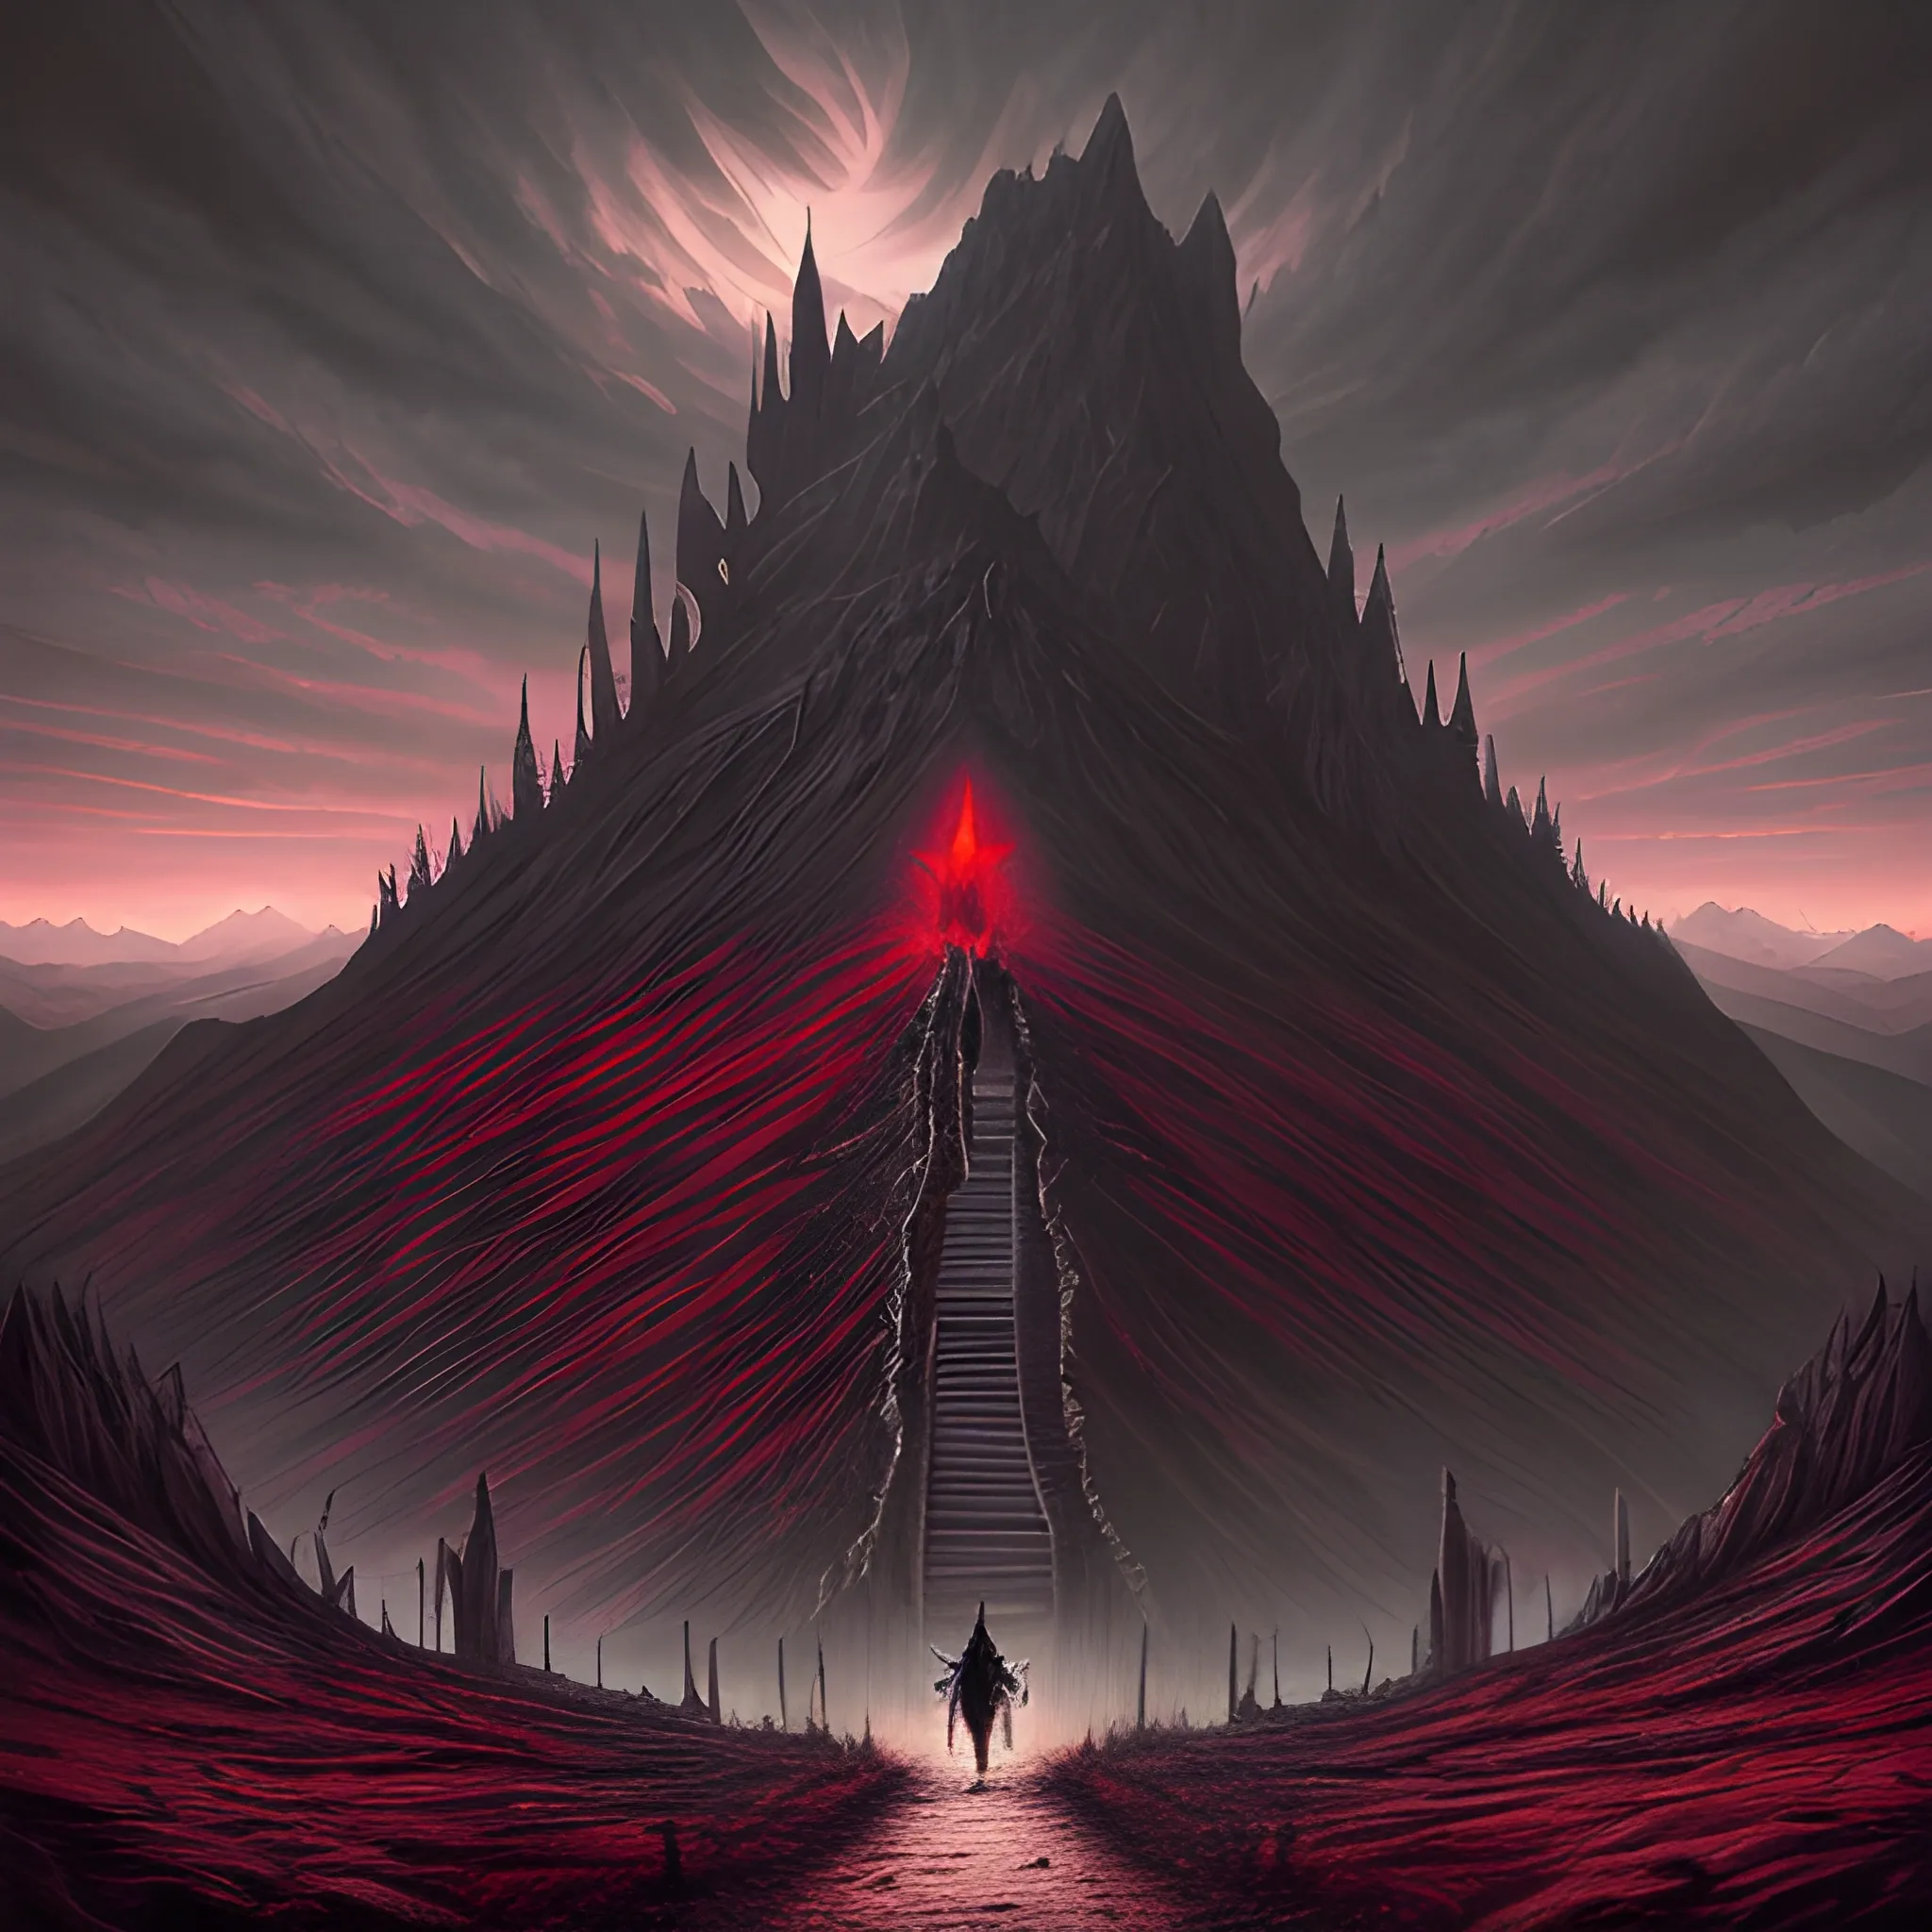 dark fantasy art, satanist walking, mountain pass, mountain range, medieval, dark red sky, a river of blood, dead trees, atmospheric aesthetic, surrealism, surrealistic, grim, old ruins, darkness, castle ruins on a mountain, skeletons